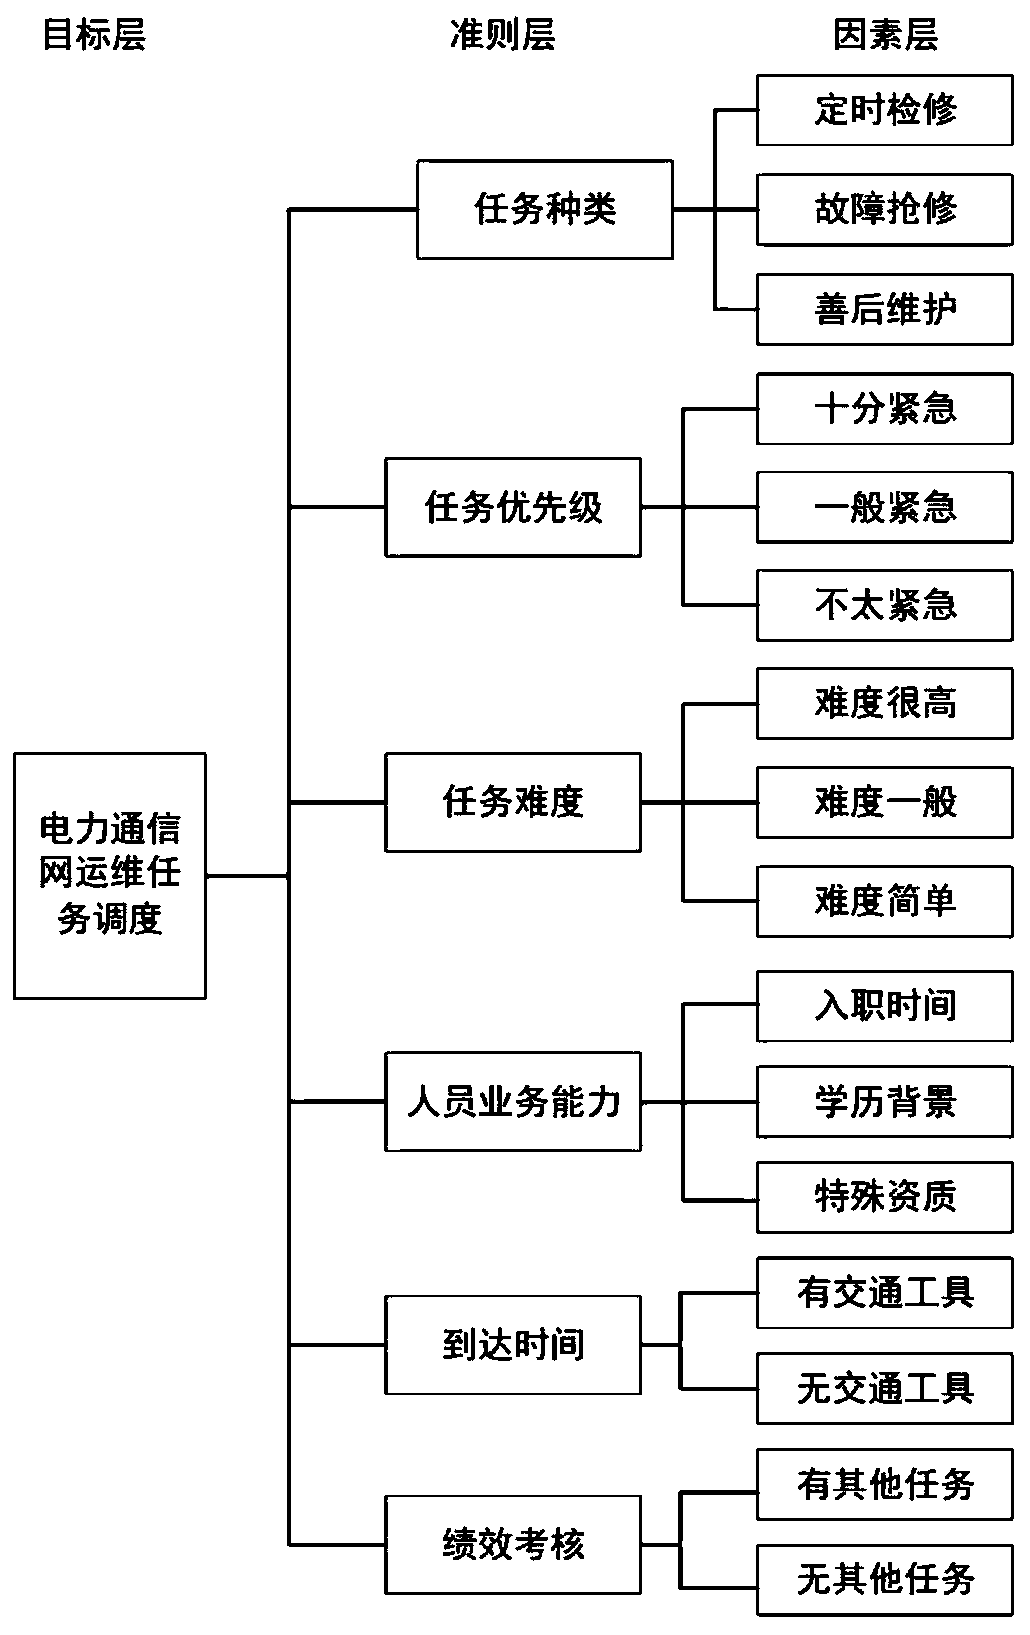 Electric power communication network operation and maintenance work order scheduling method based on Hopfield neural network